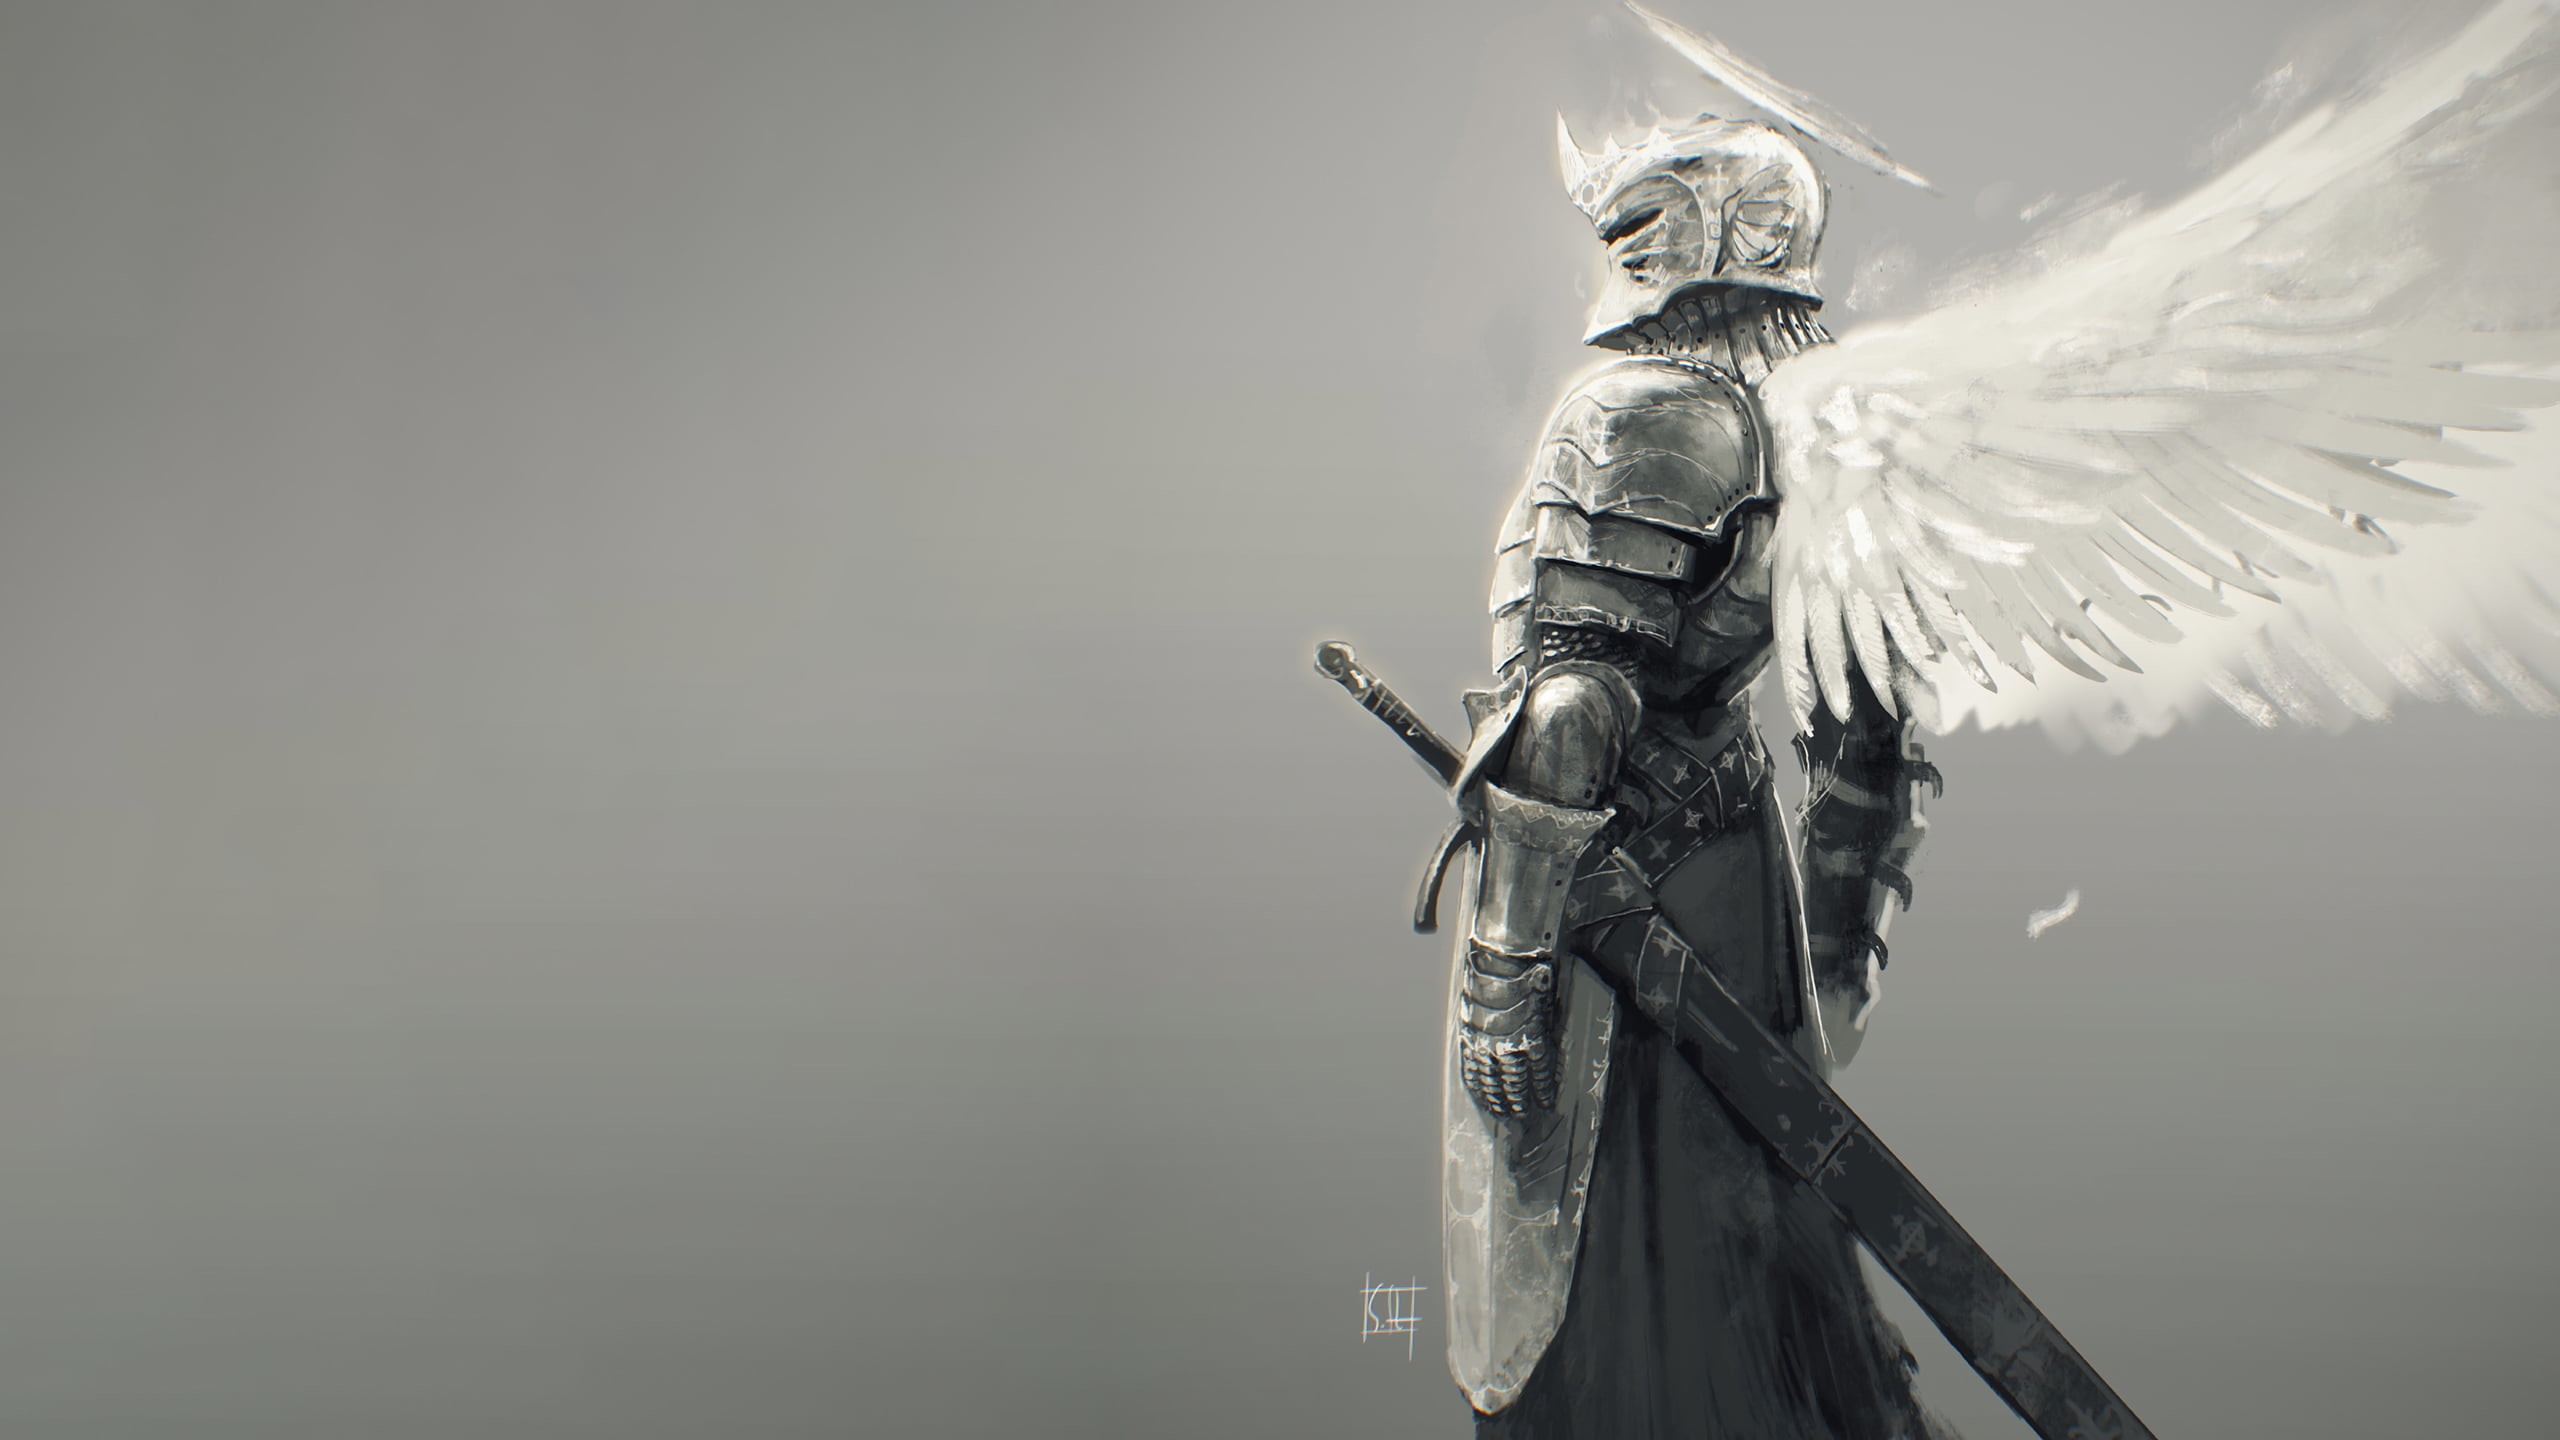 2560x Medieval Knight With Wings And Halo Illustration